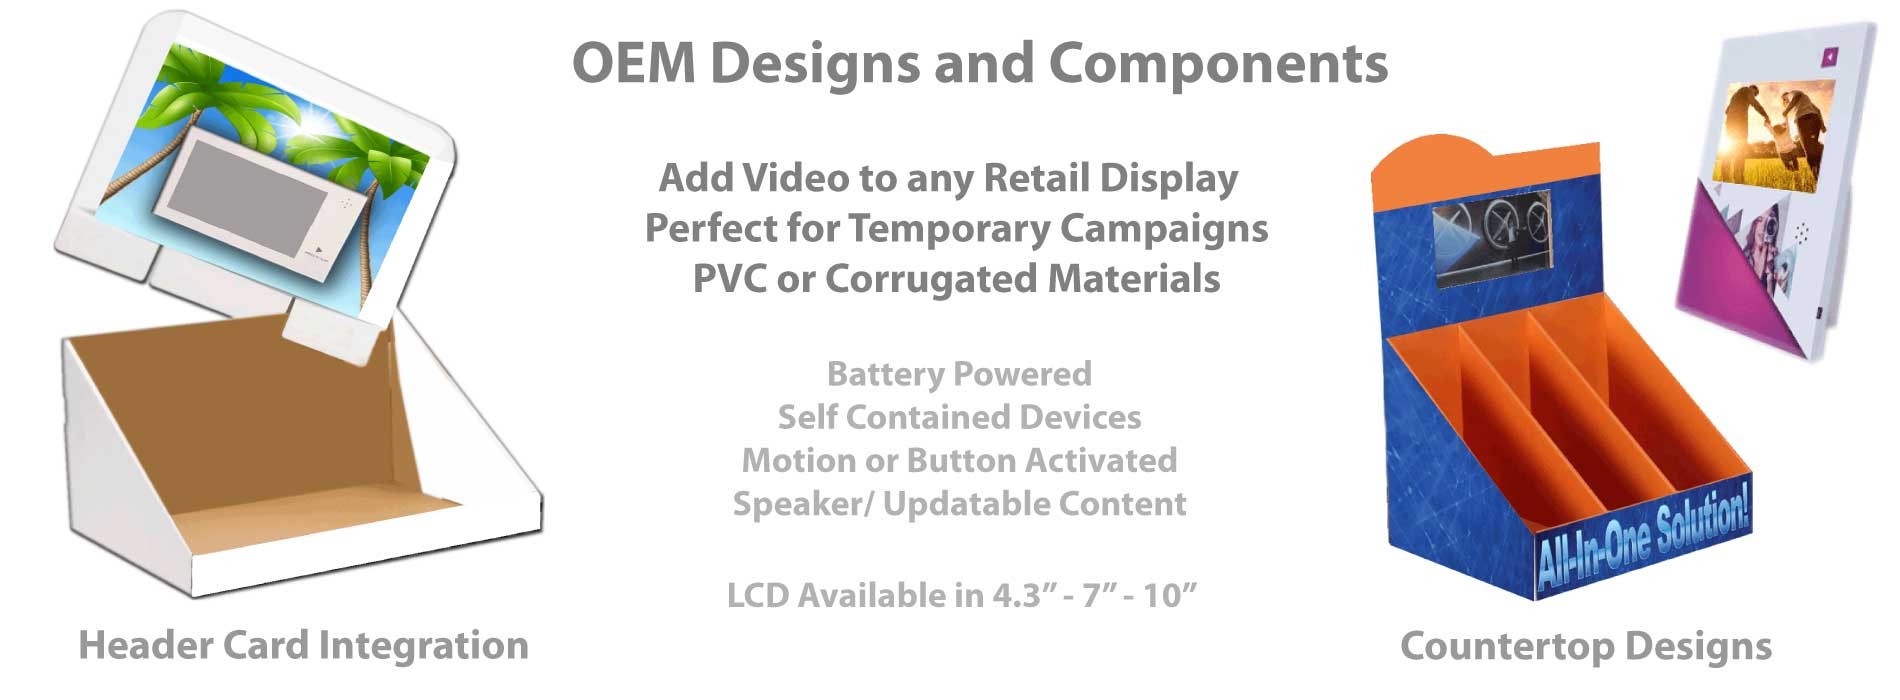 Retail Display Components